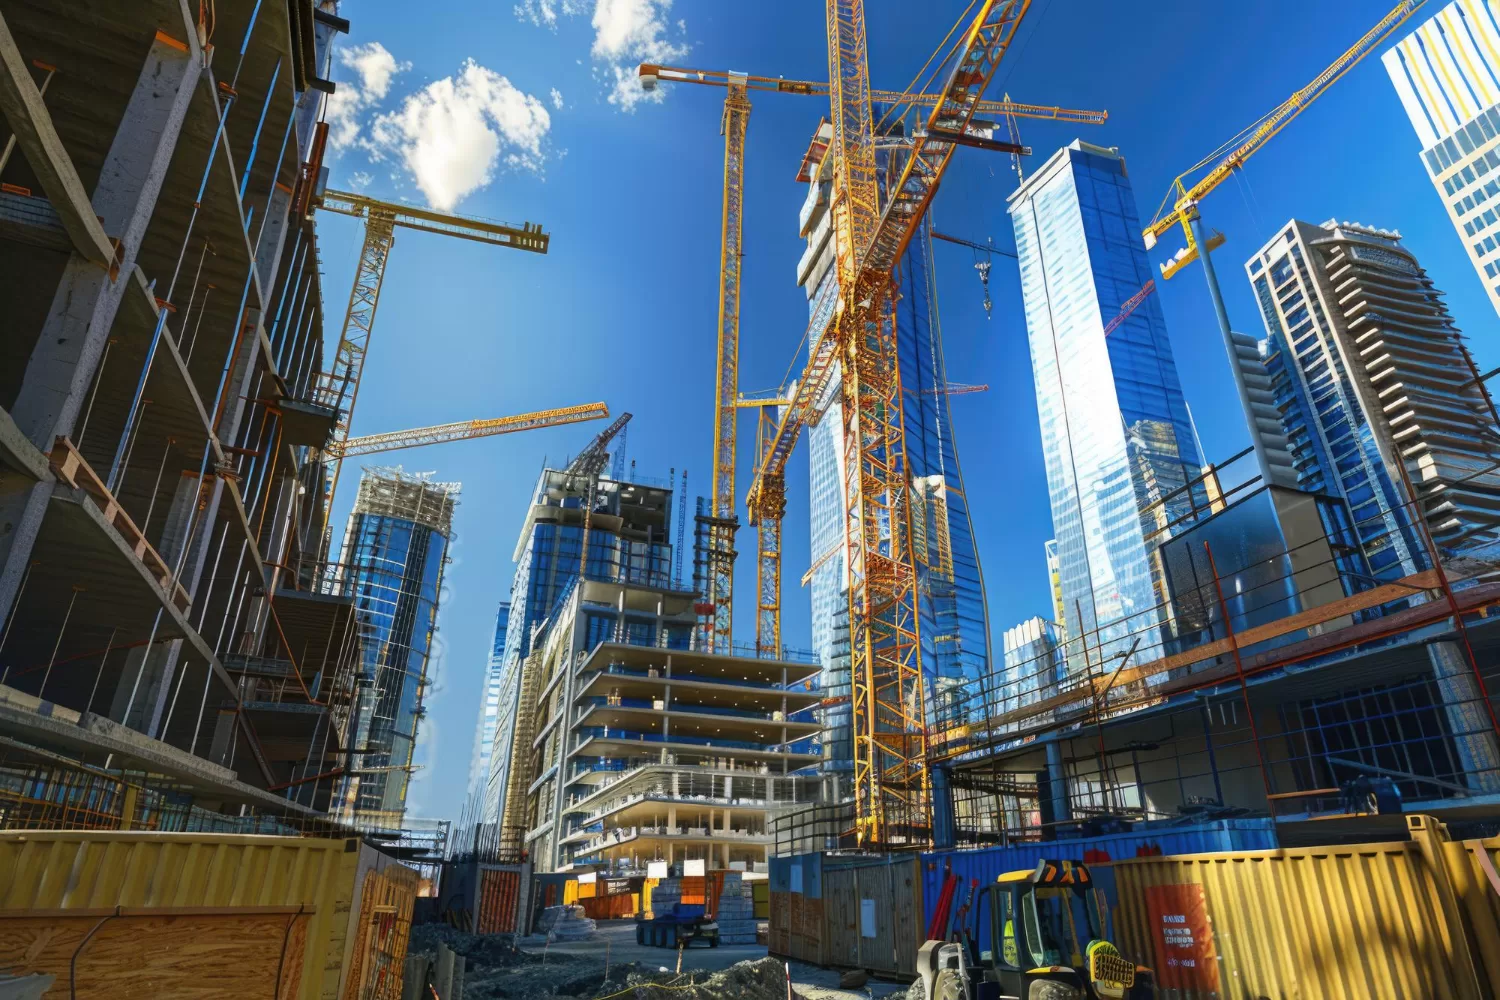 The US construction sector continues to thrive despite the tightening monetary policy over the past two years. With demand for housing outpacing supply, companies involved in construction and real estate stand to benefit from growing sales and margins. Here are three top picks in the construction sector